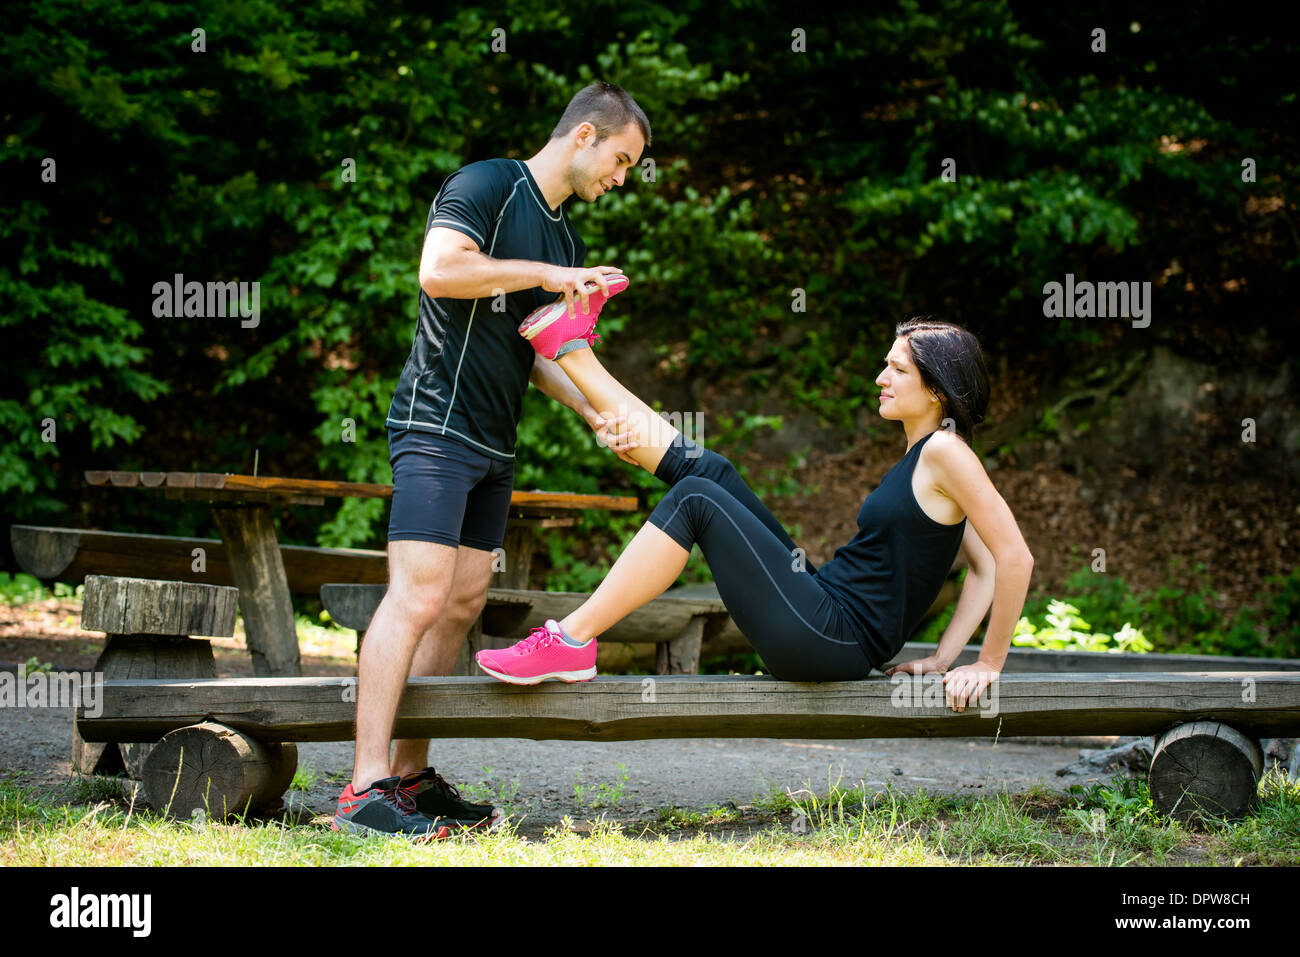 Man stretches womans leg - muscle spasm after sport training Stock Photo